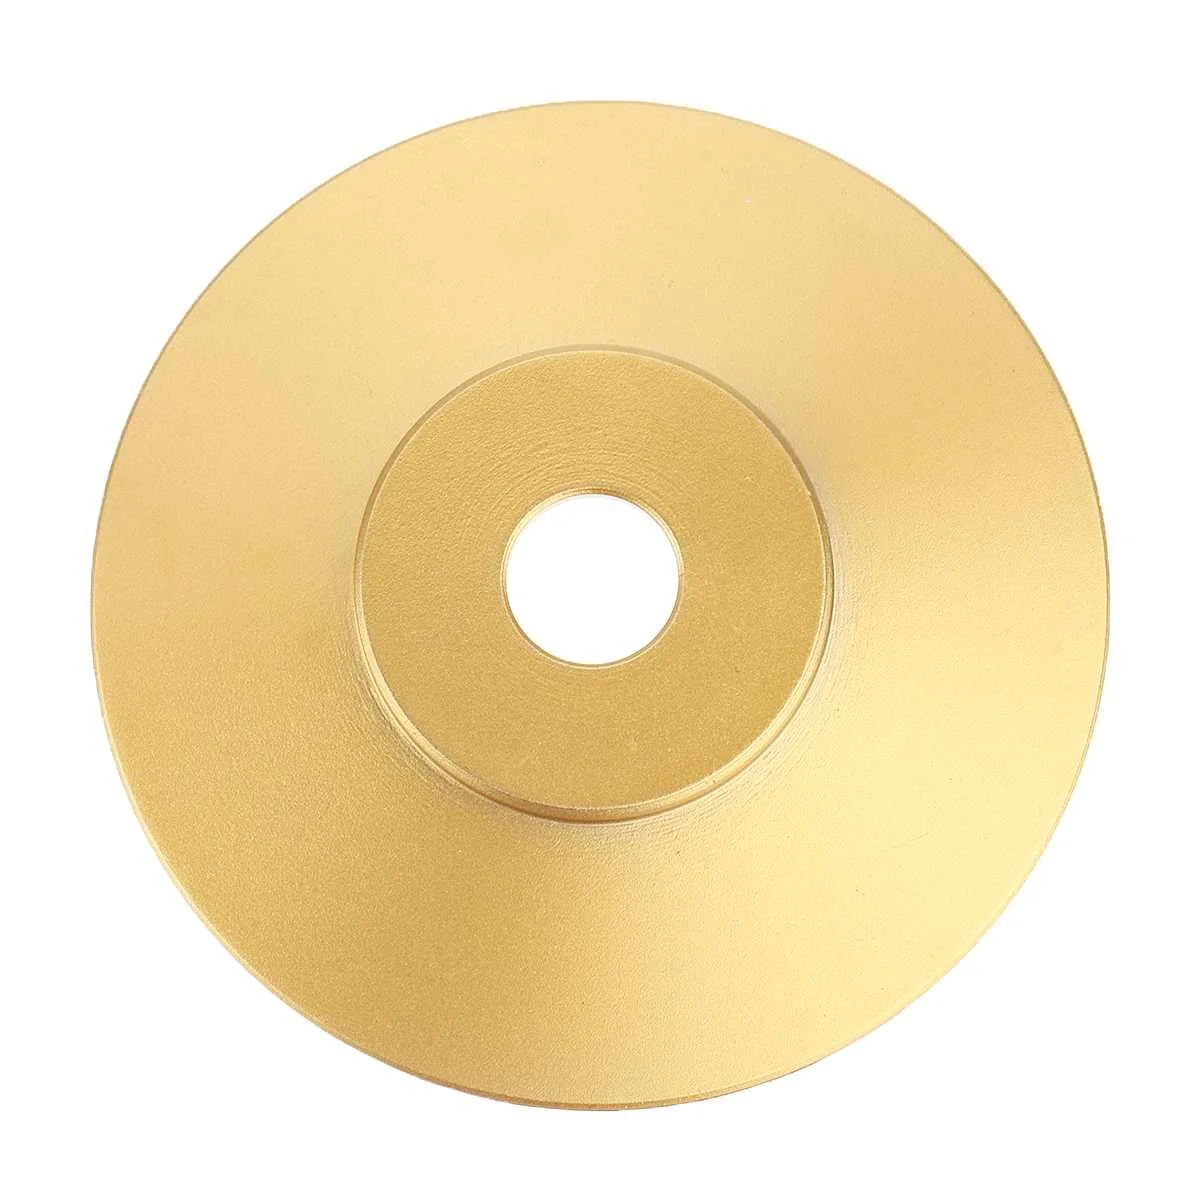 

98mm Round Wood Angle Grinding Wheel Abrasive Disc Angle Grinder Carbon Steel 16mm Bore Shaping Sanding Carving Rotary Tool